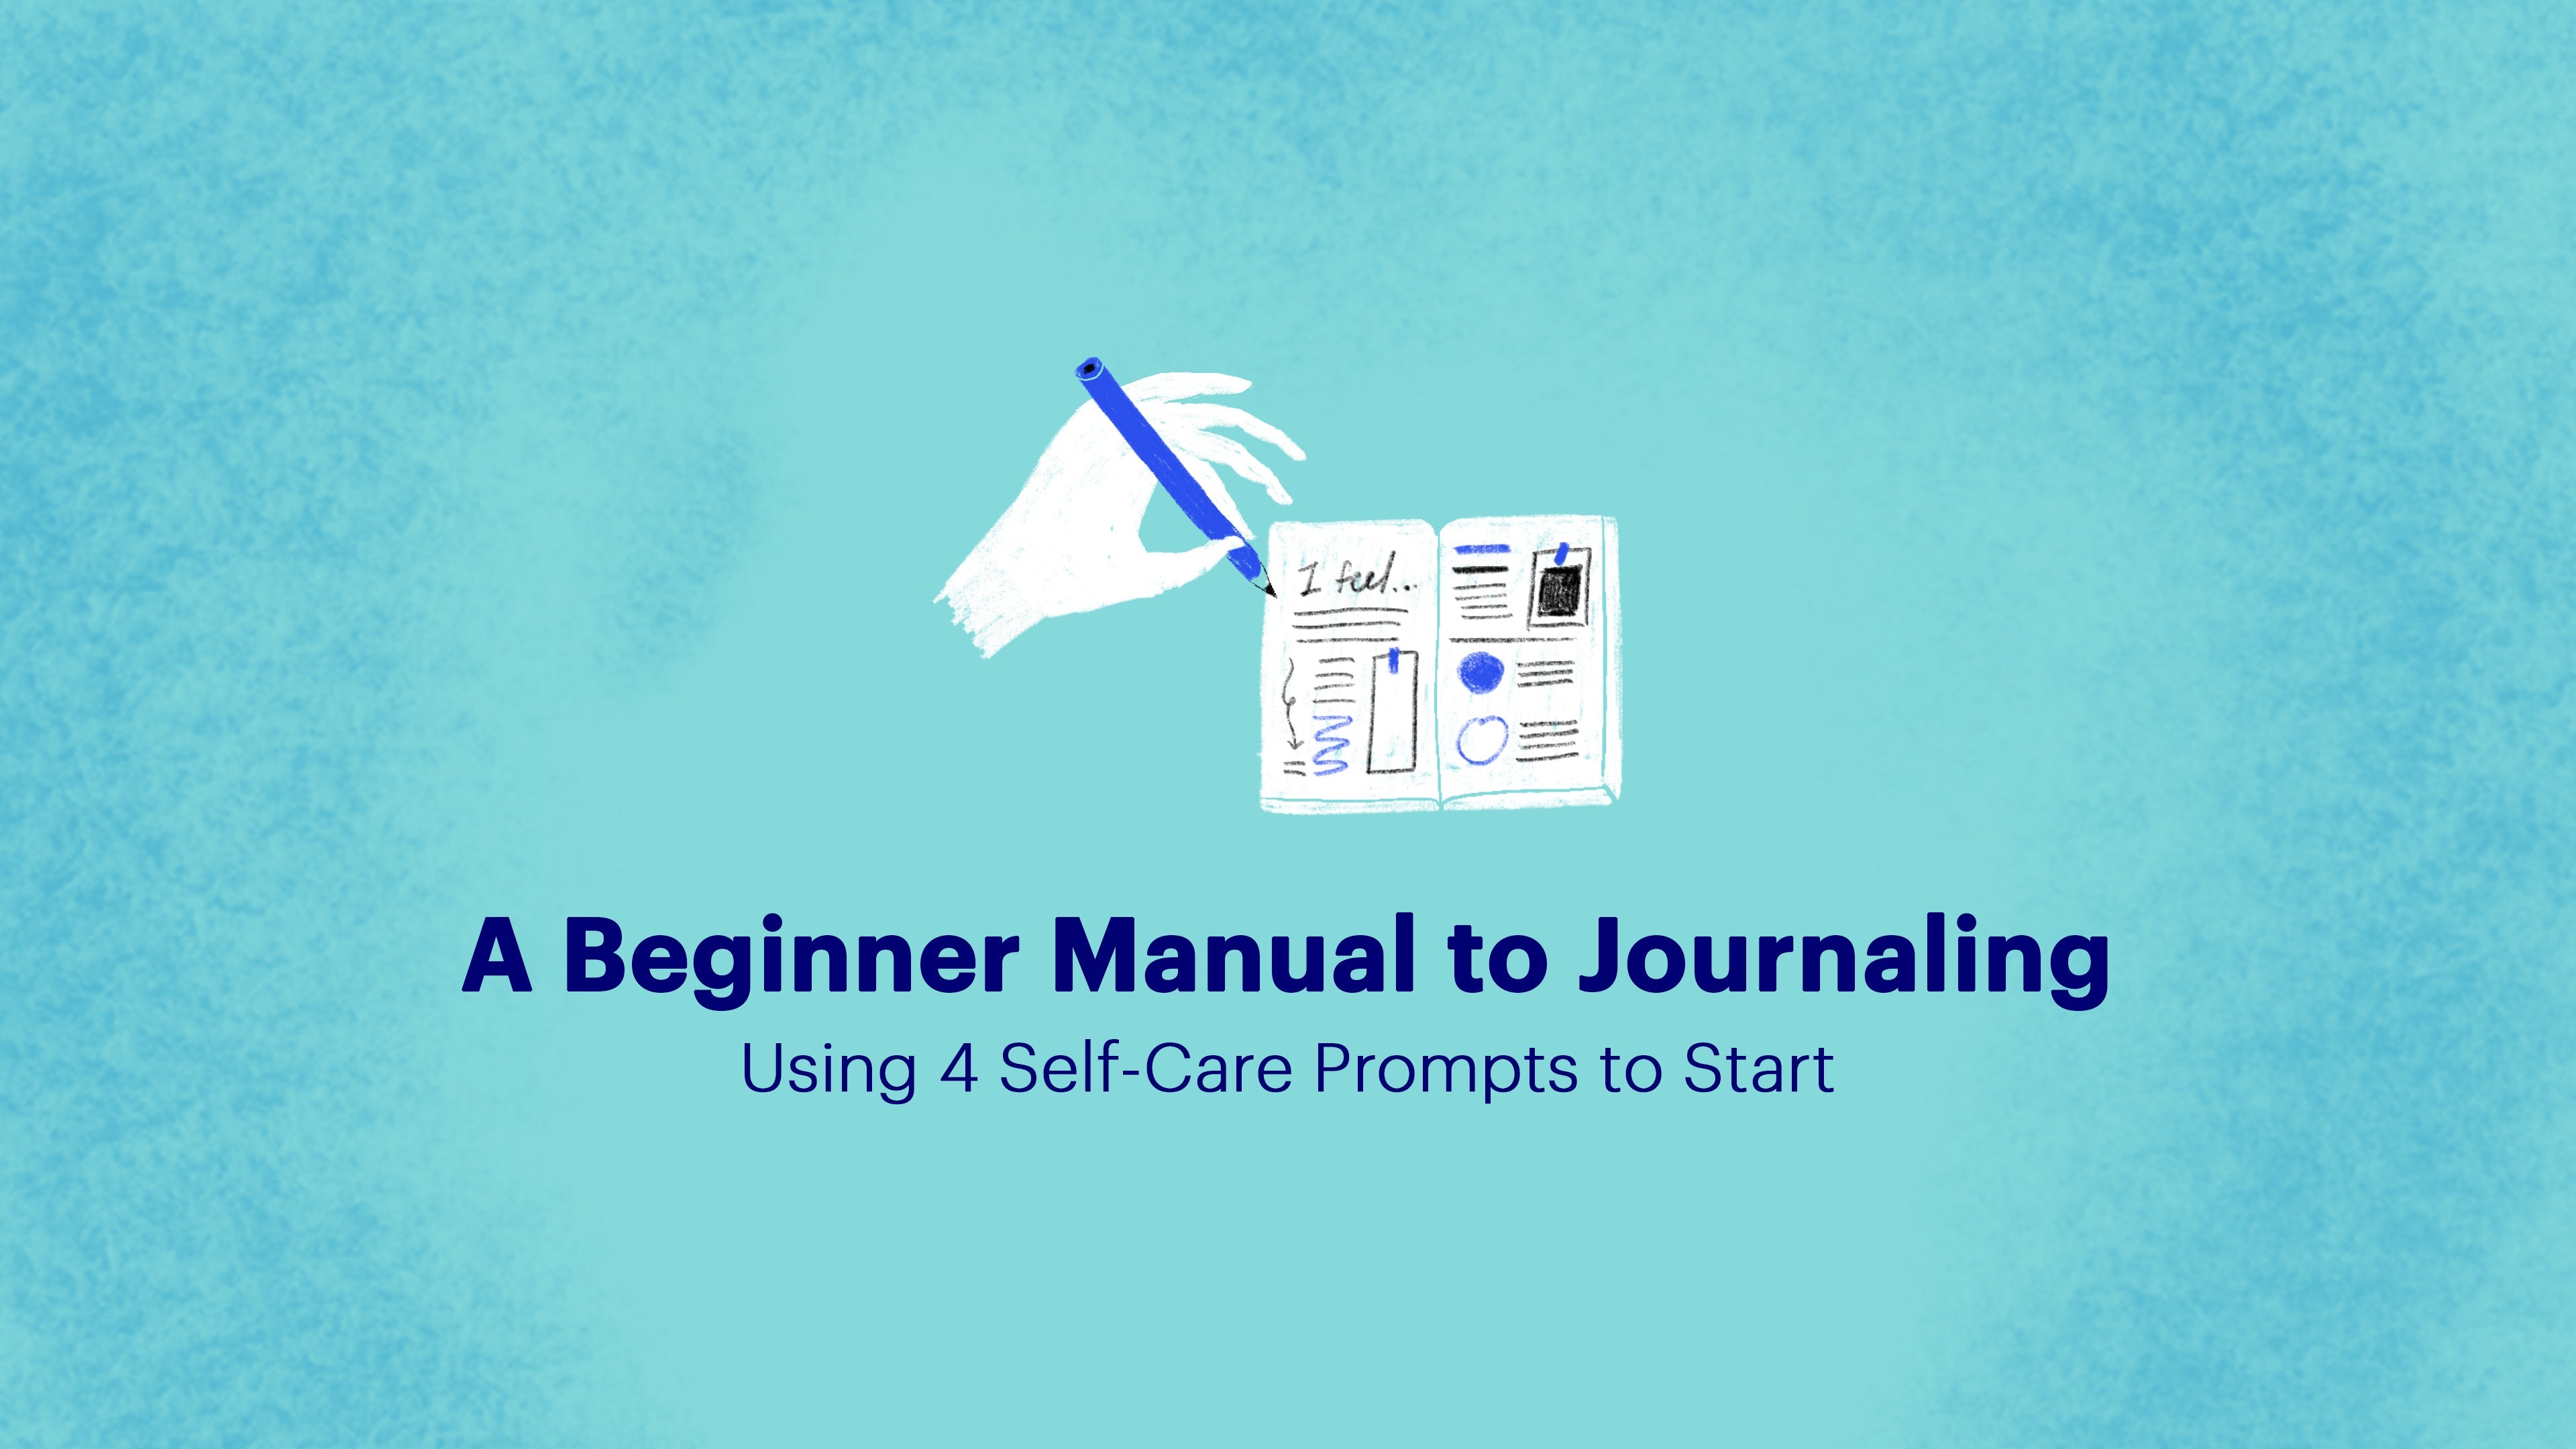 A Beginner Manual to Journaling: Using 4 Self-Care Prompts To Start